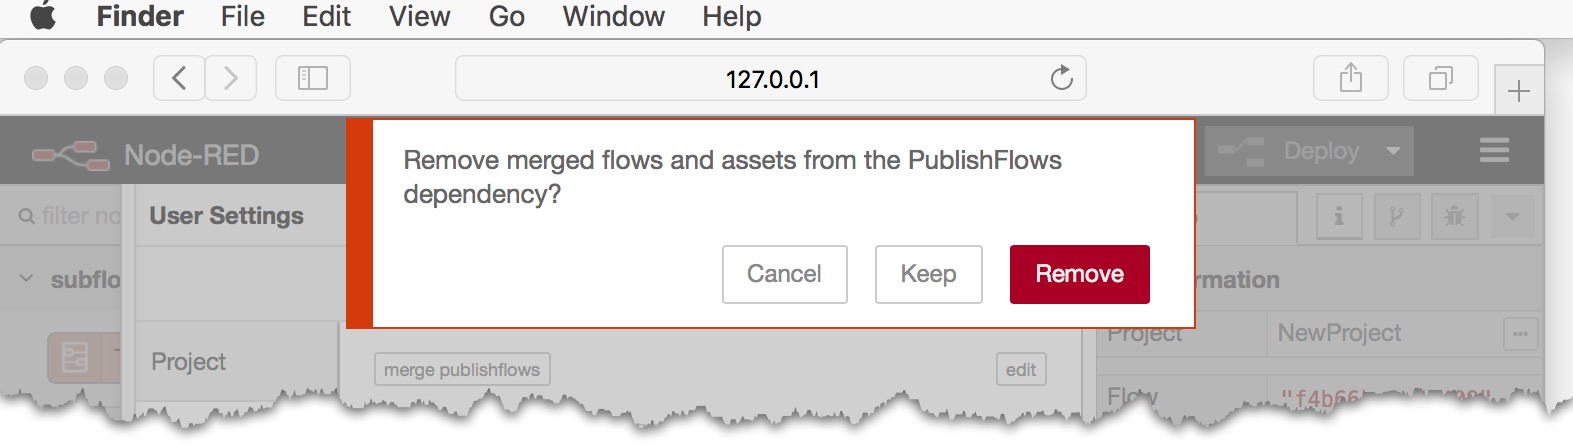 Image of publishflows dependency removal